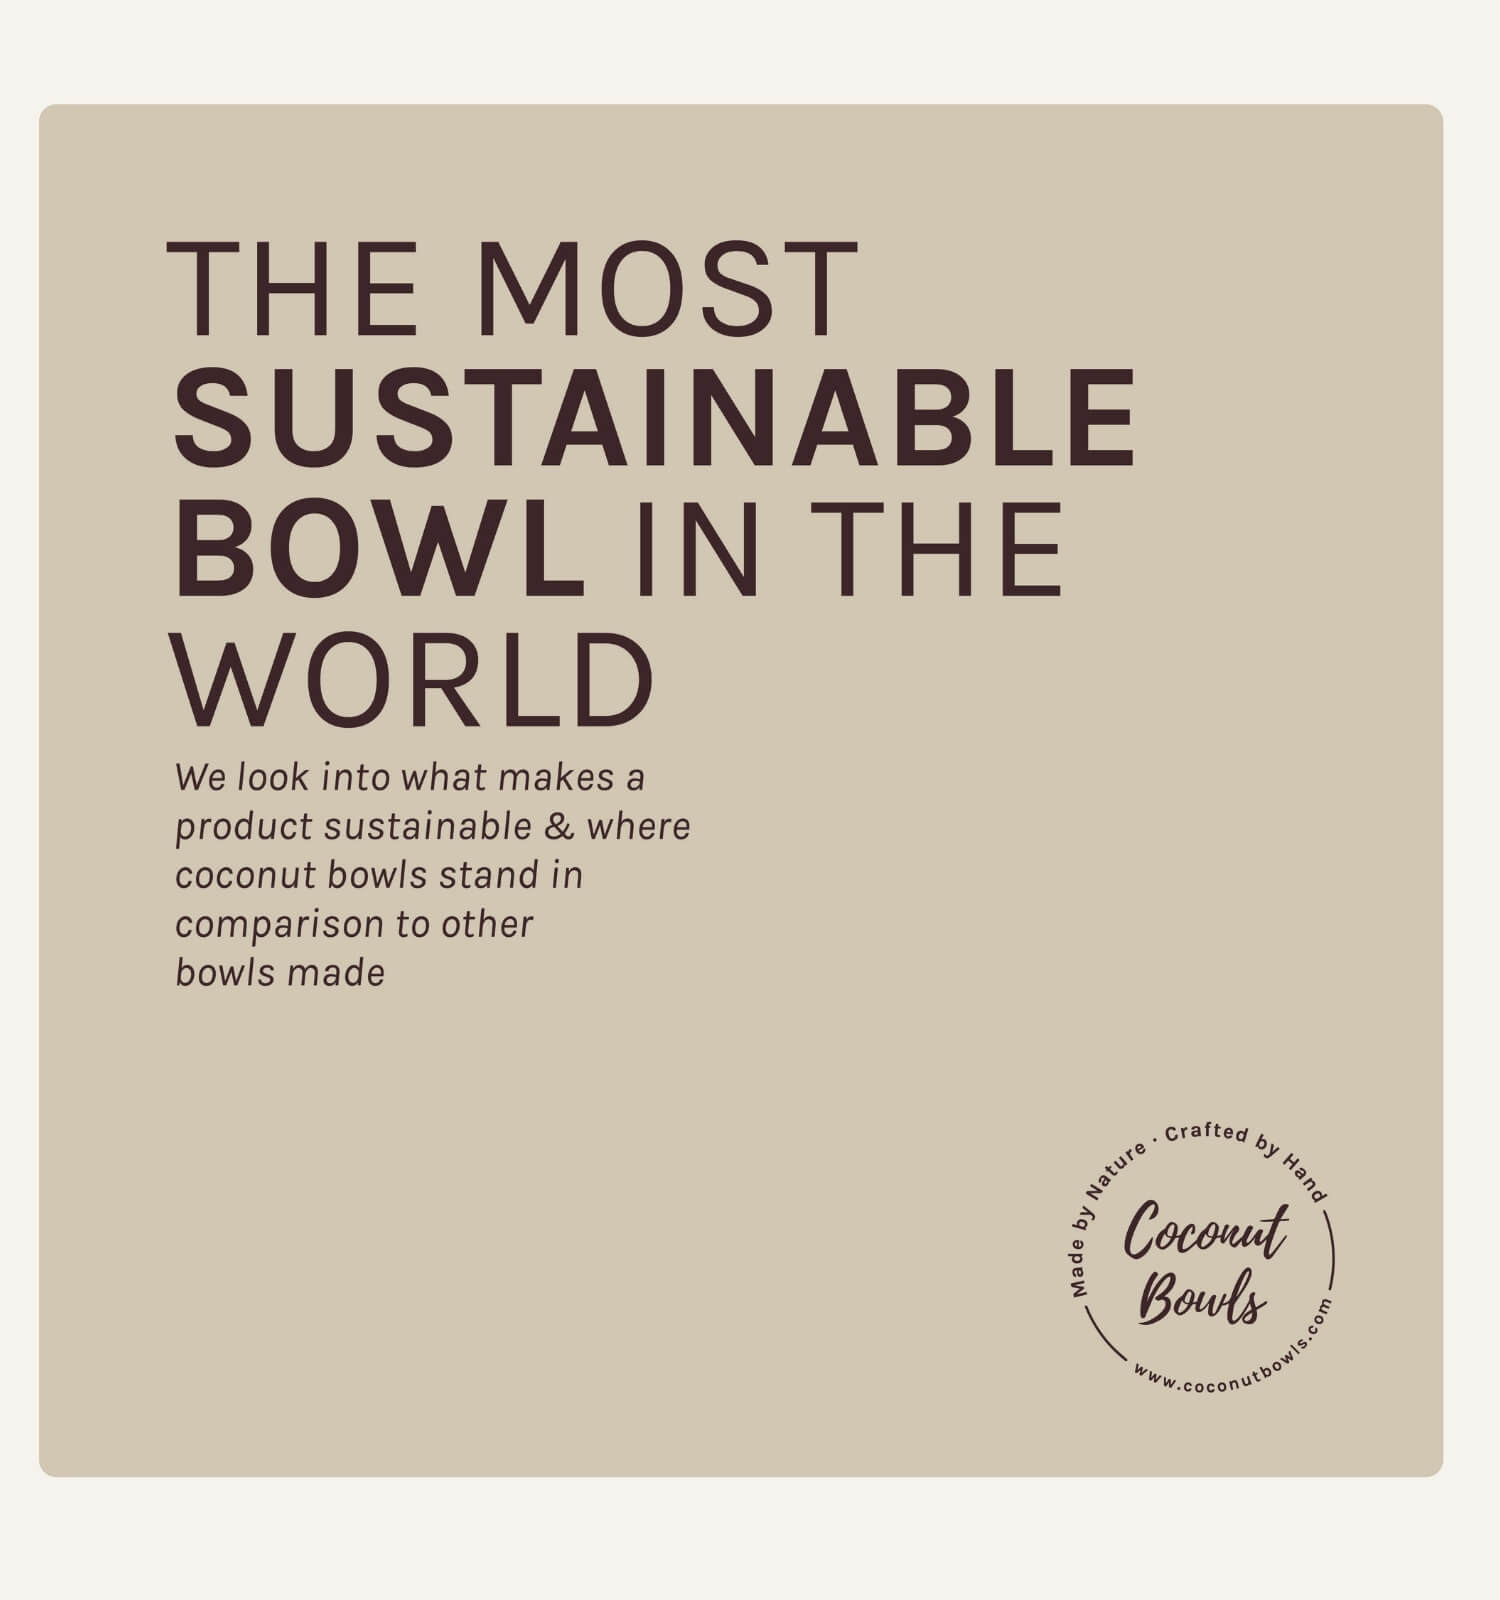 The Most Sustainable Bowl in the World